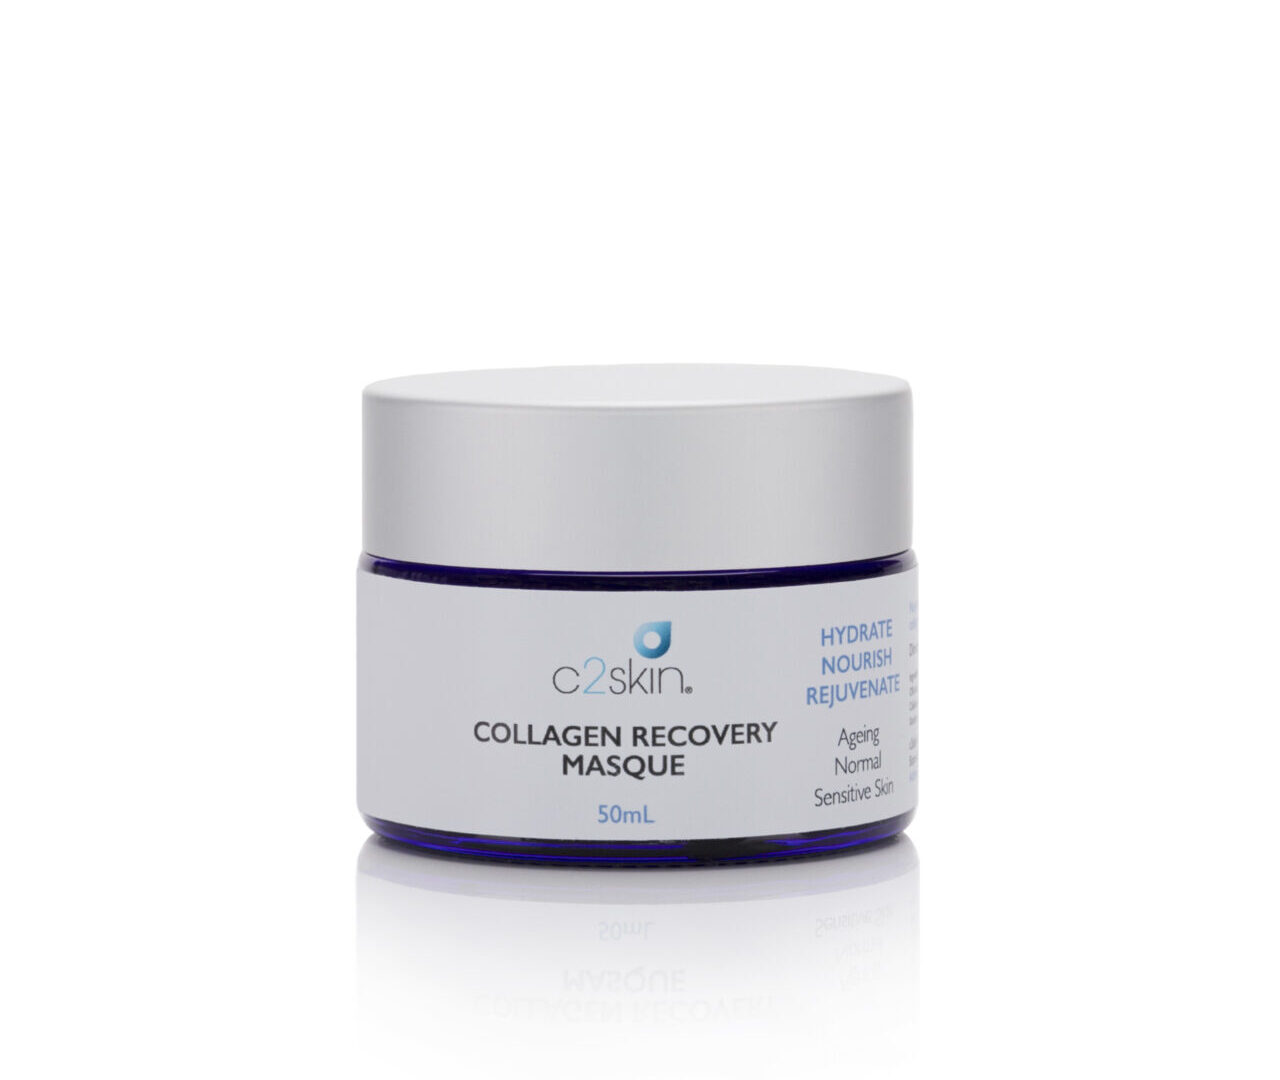 Collagen Recovery Masque 50mL